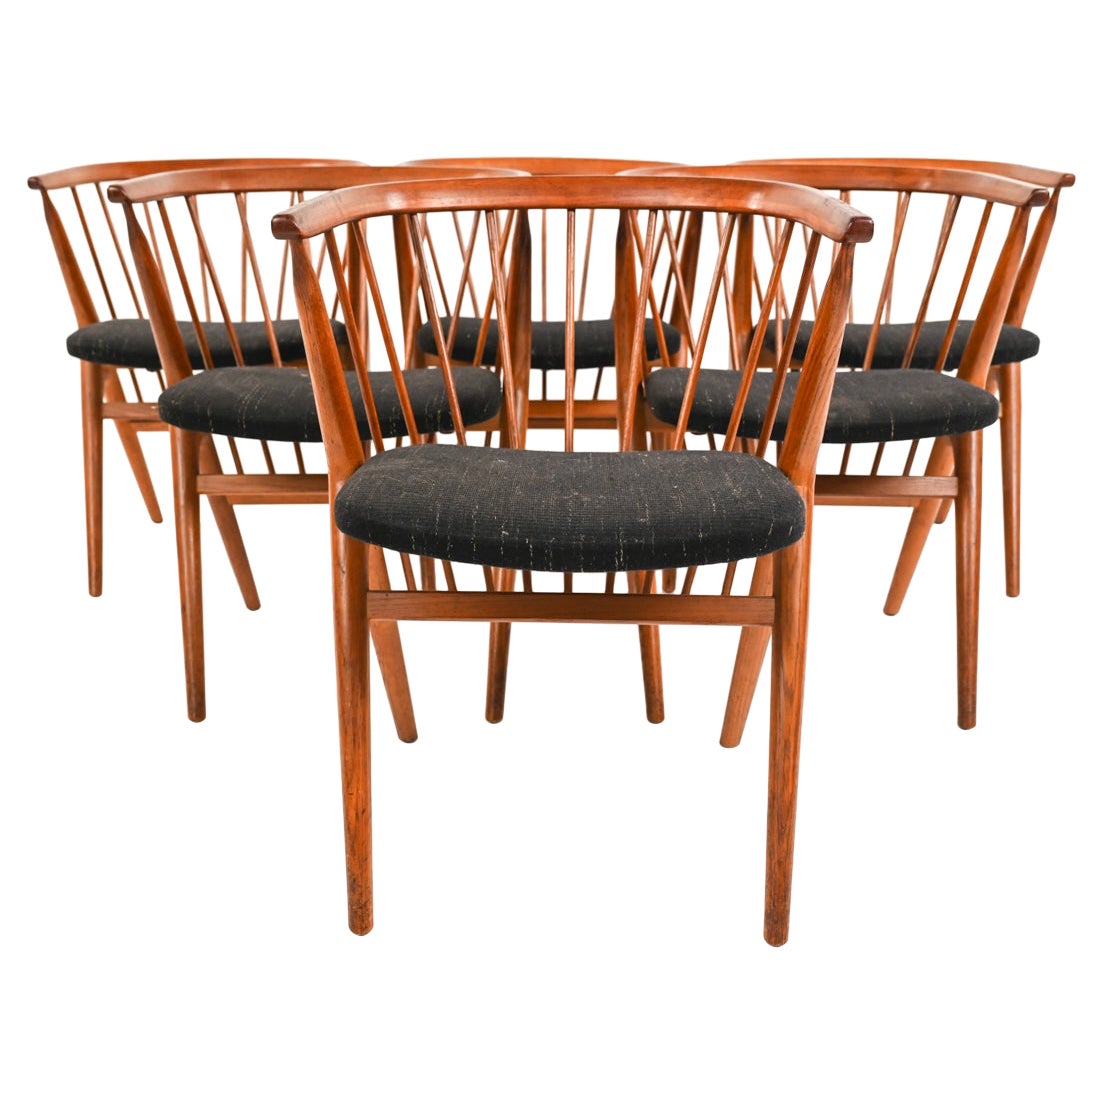 '6' Helge Sibast for Sibast No. 8 Teak Dining Chairs